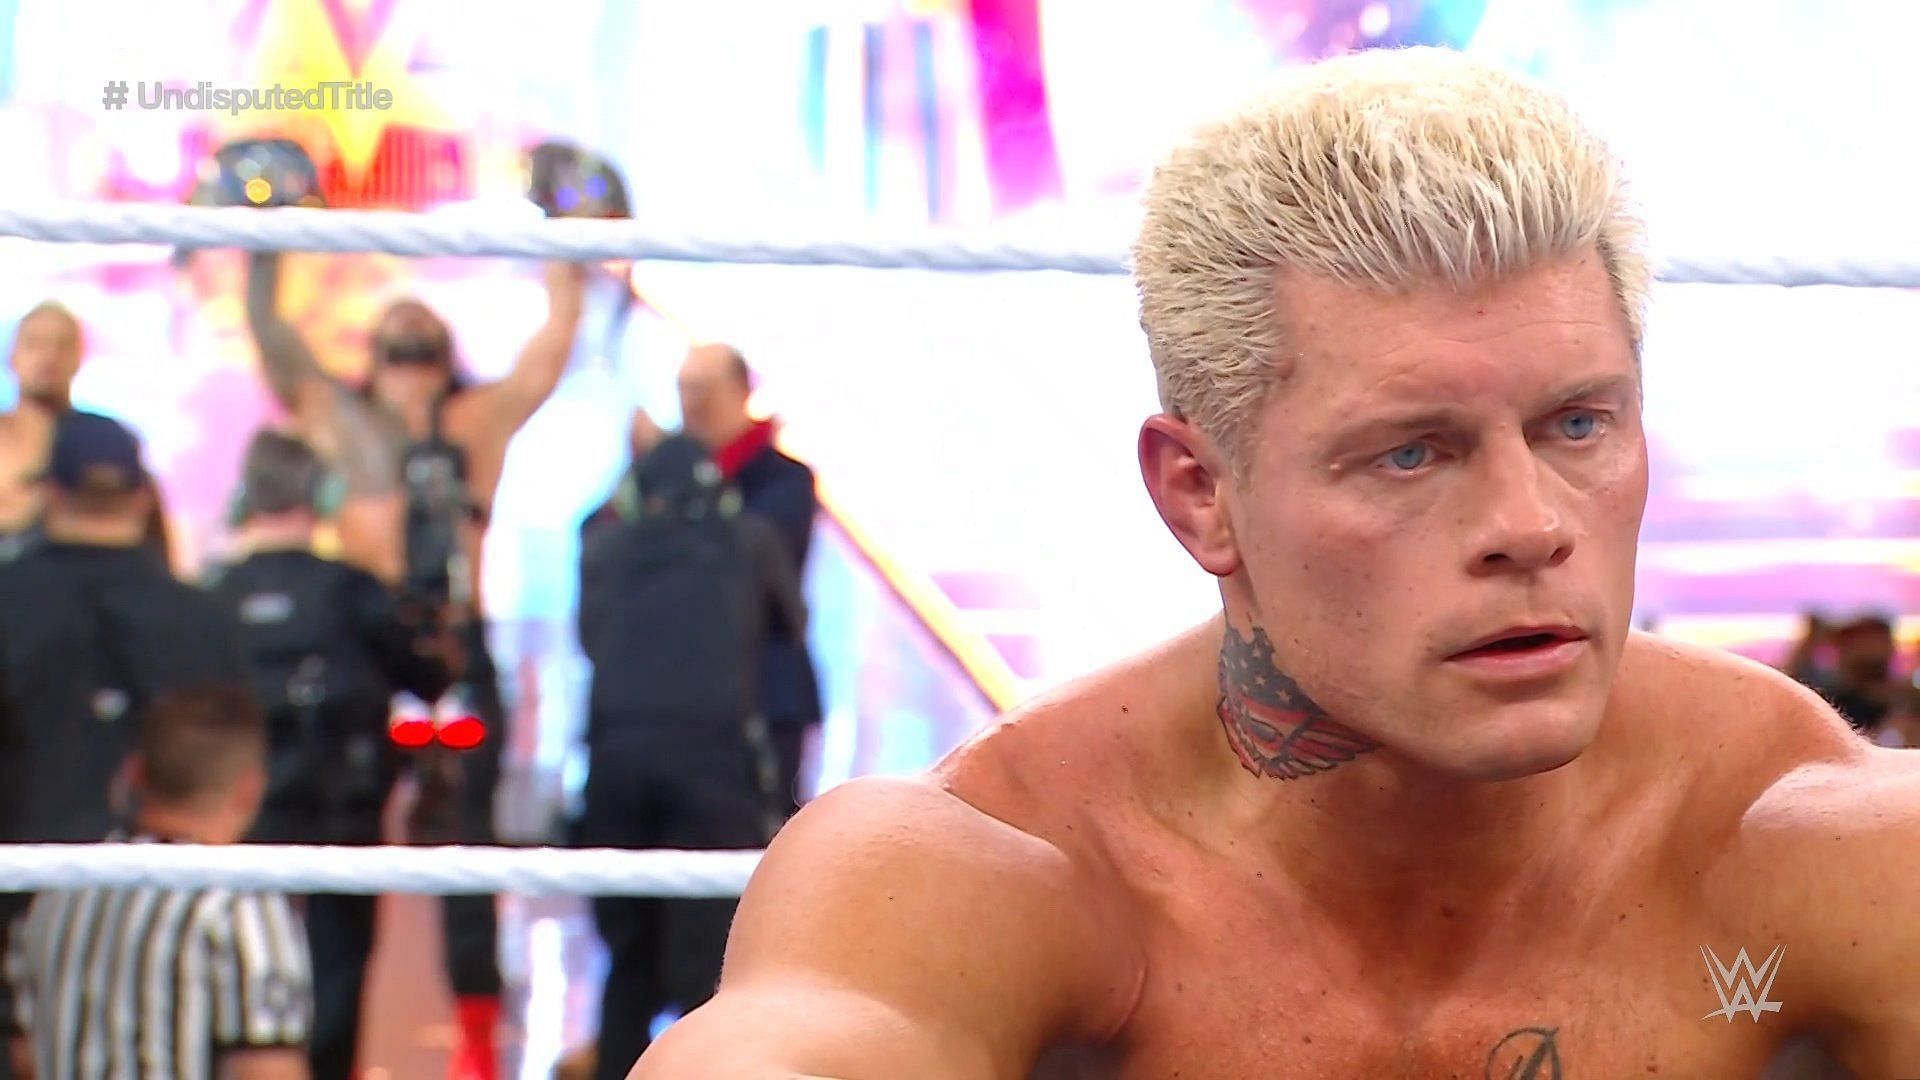 Cody Rhodes lost to Roman Reigns at WrestleMania 39.